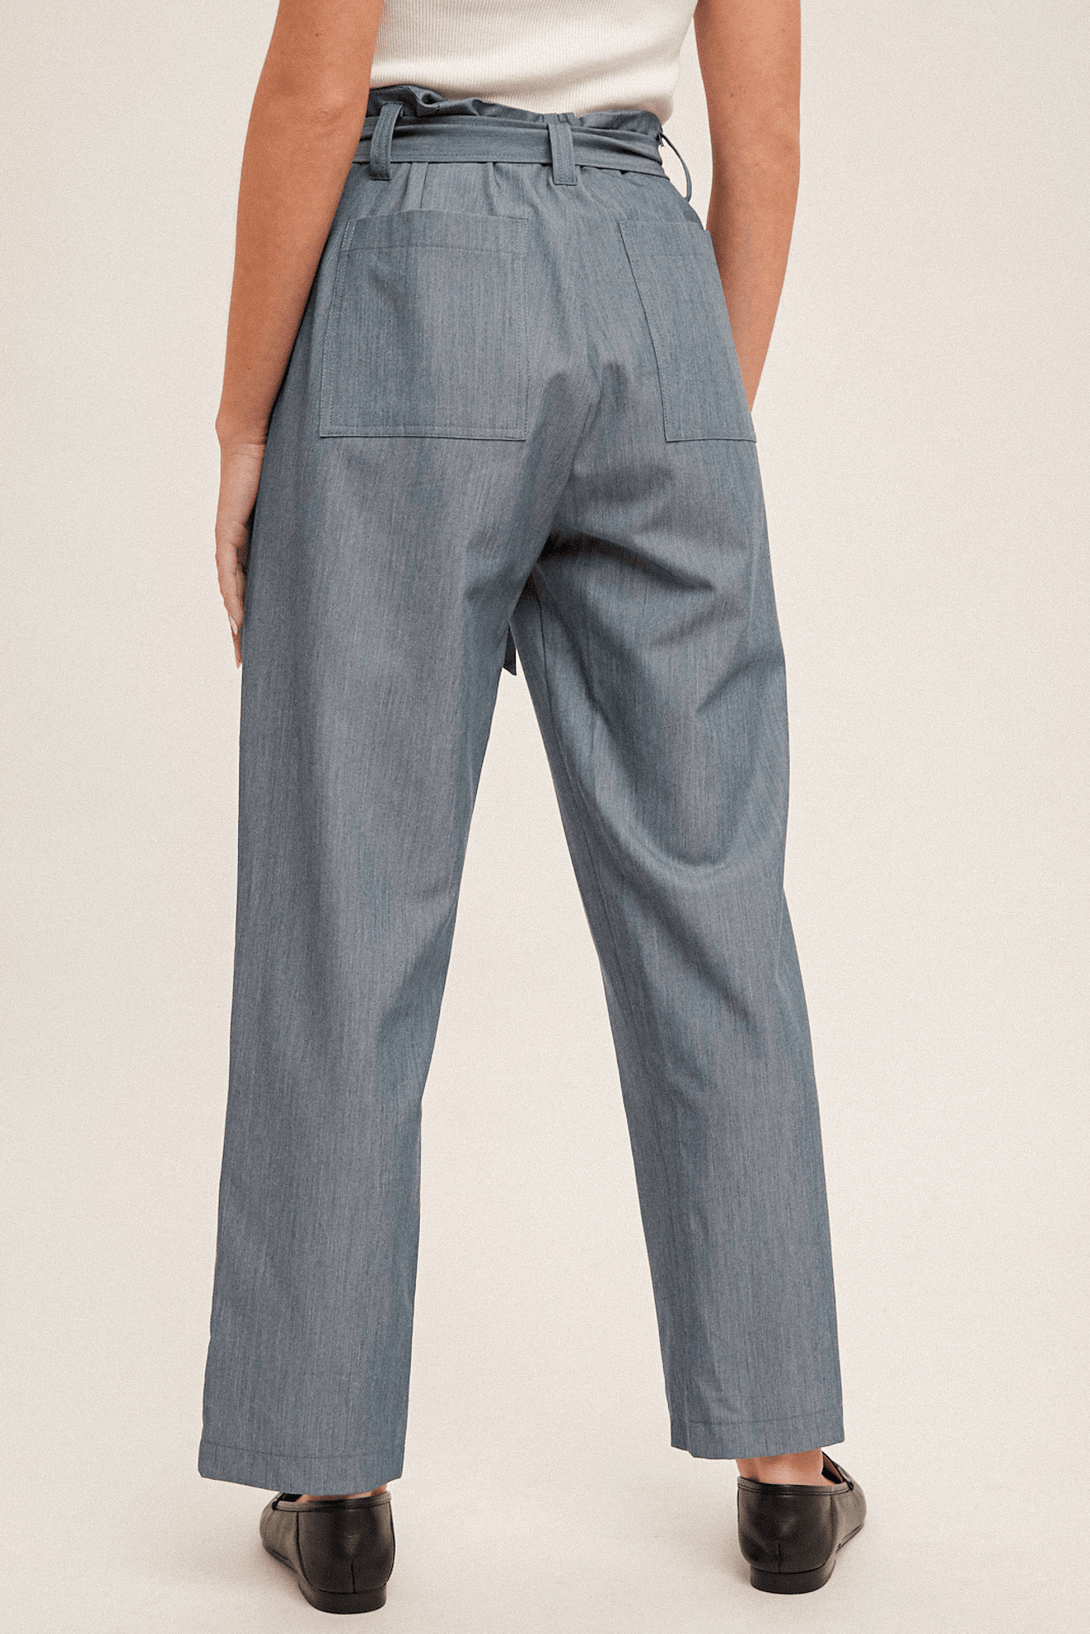 Hem & Thread Tapered Ankle Length Tie Front Pants